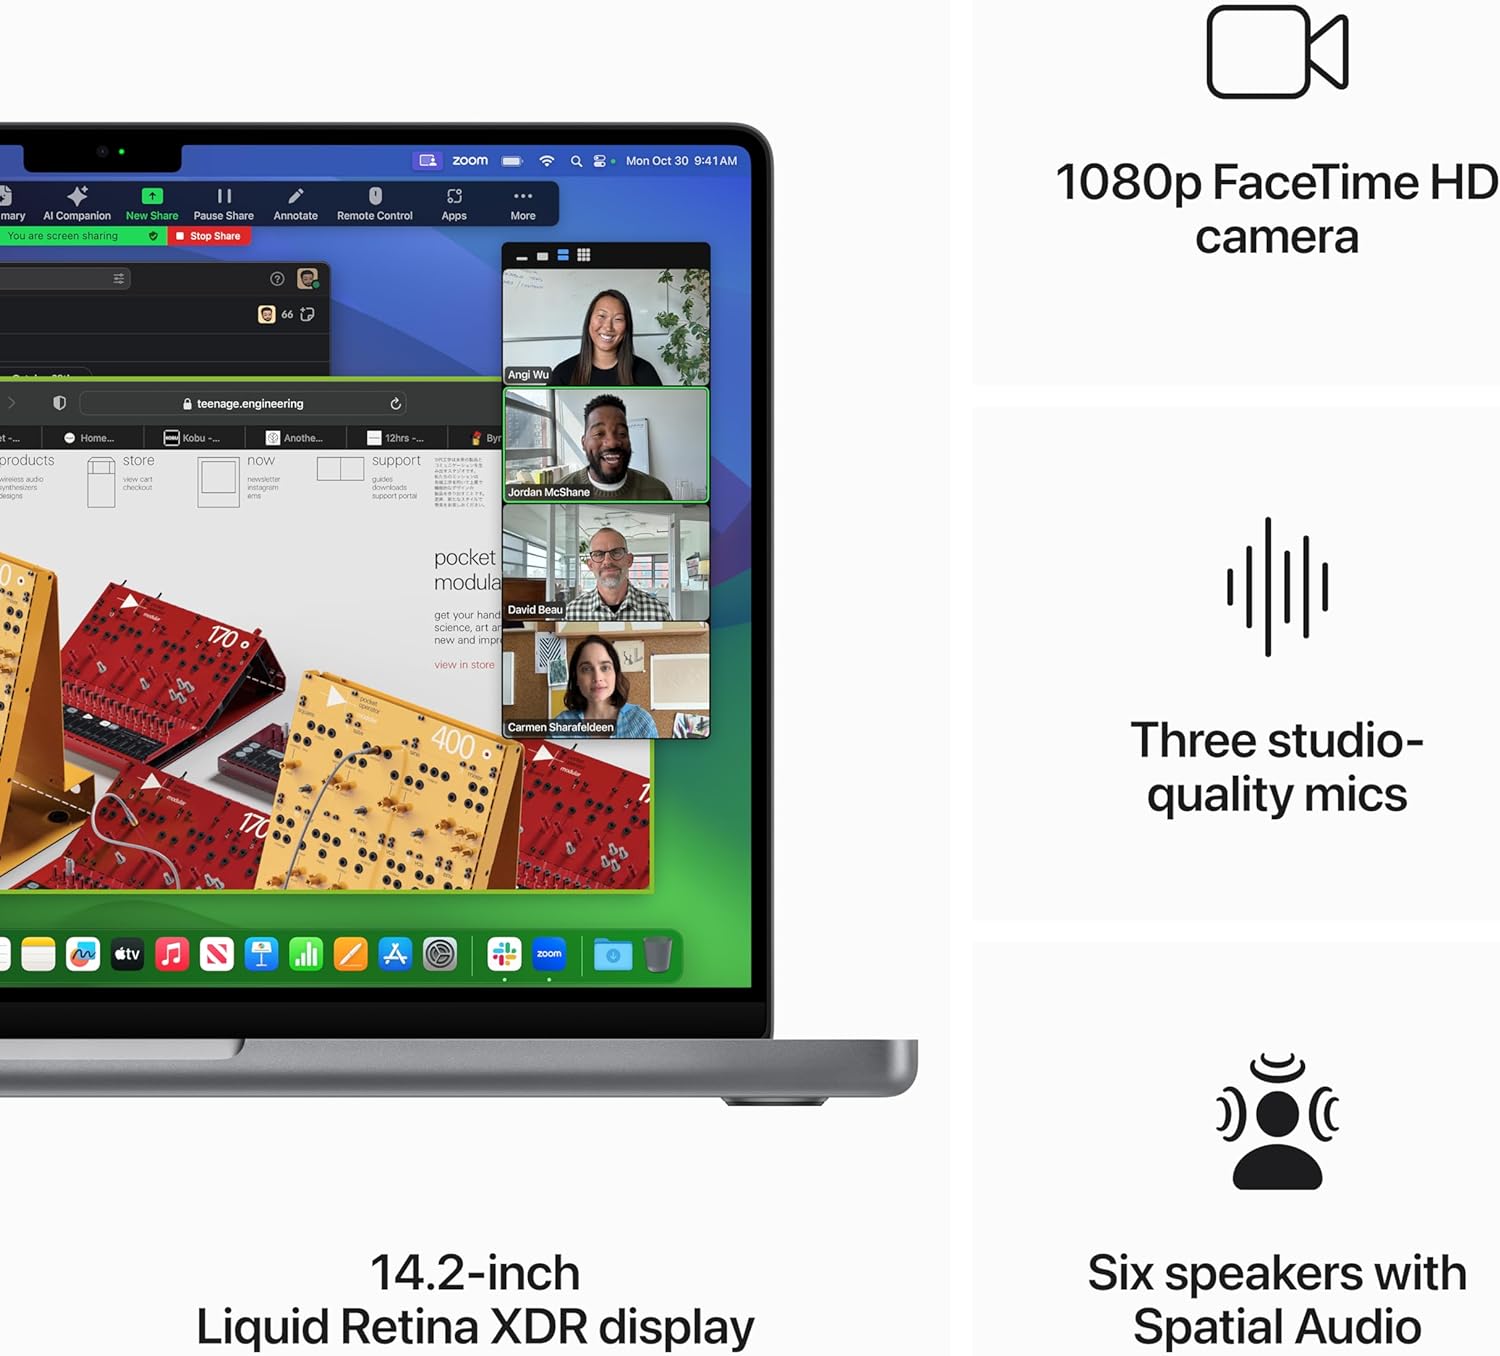 Apple 2023 MacBook Pro Laptop M3 chip with 8‑core CPU, 10‑core GPU: 14.2-inch Liquid Retina XDR Display, 8GB Unified Memory, 512GB SSD Storage. Works with iPhone/iPad; Space Gray